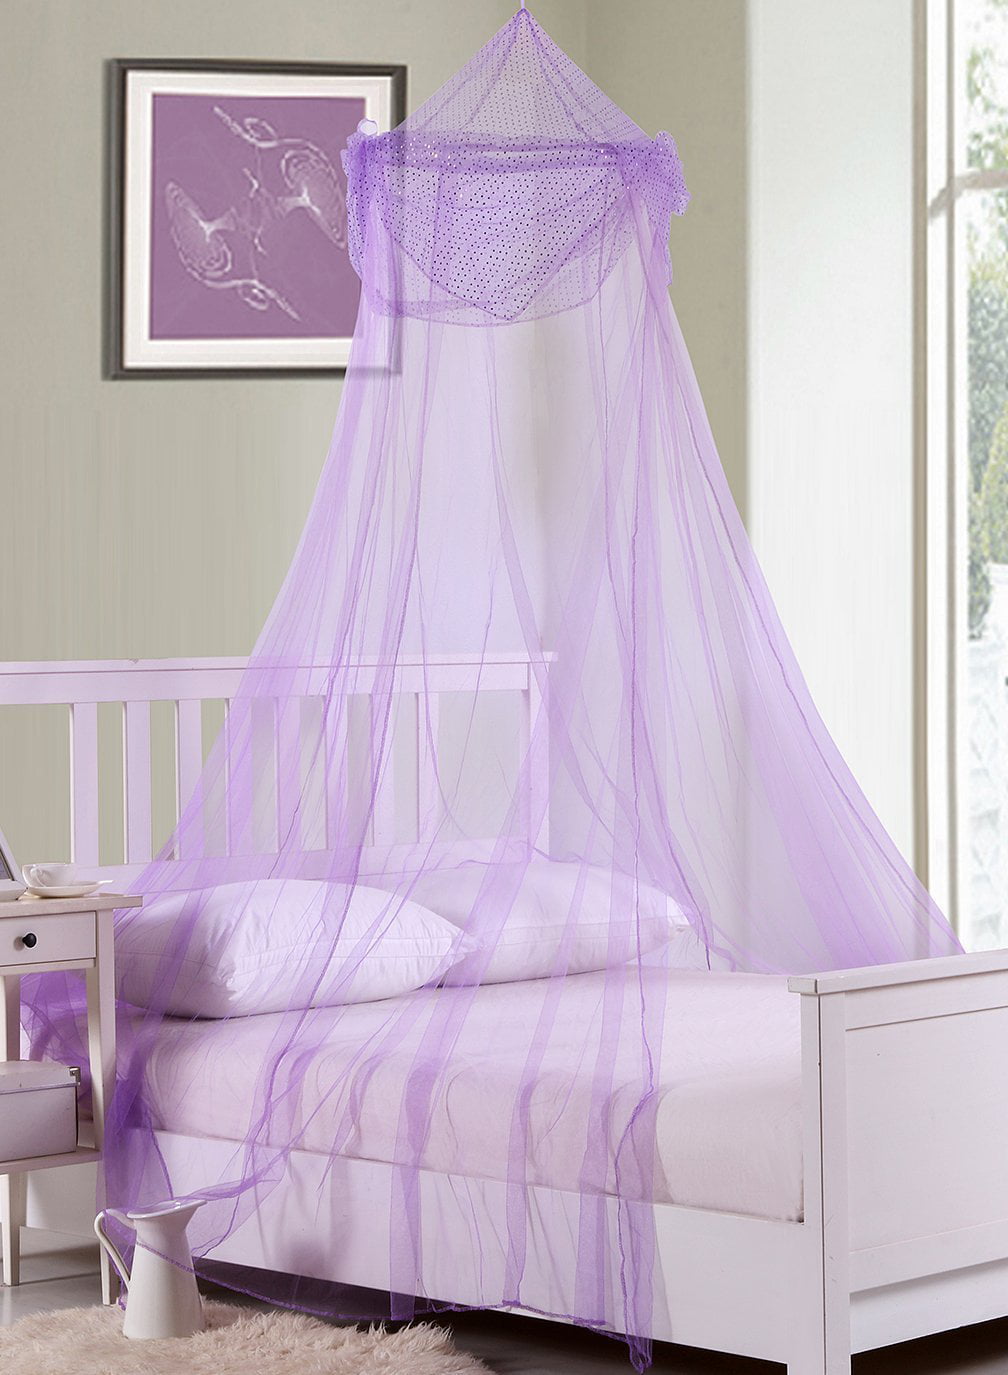 Pink/White Details about   Pillowfort Dip Dye Twin Bed/ Play Area Canopy 